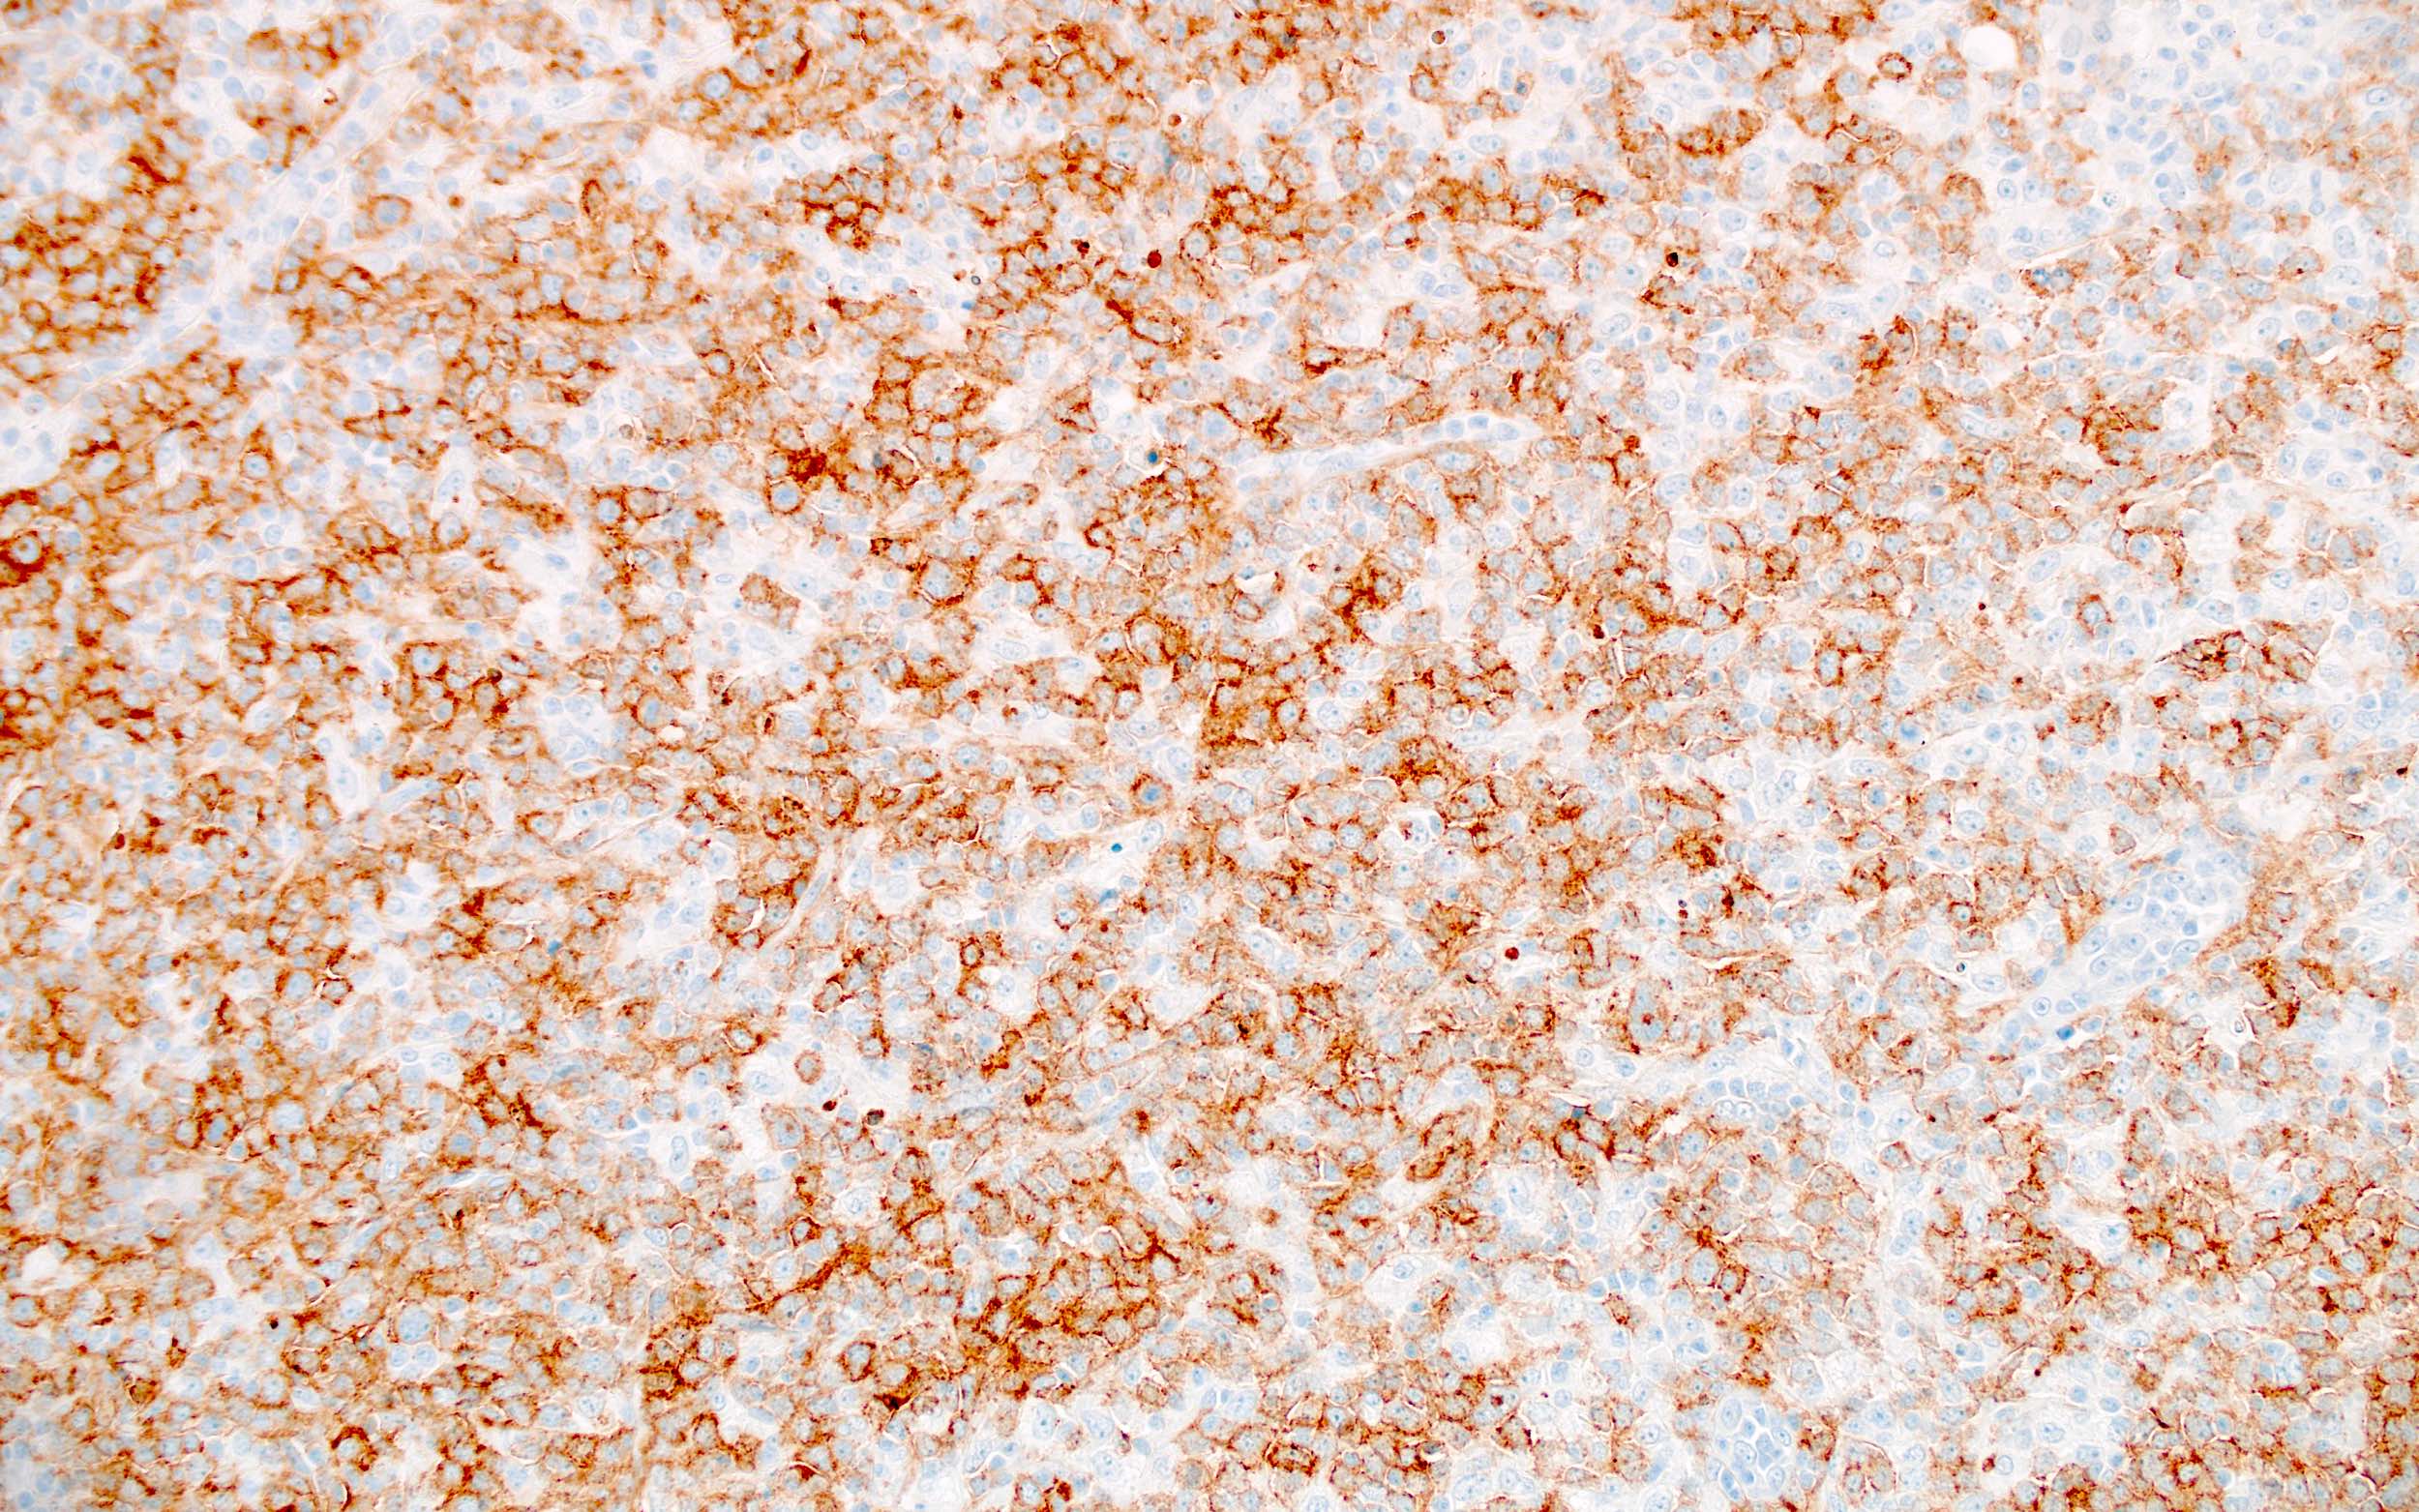 Large atypical cells of DLBCL, CD10+